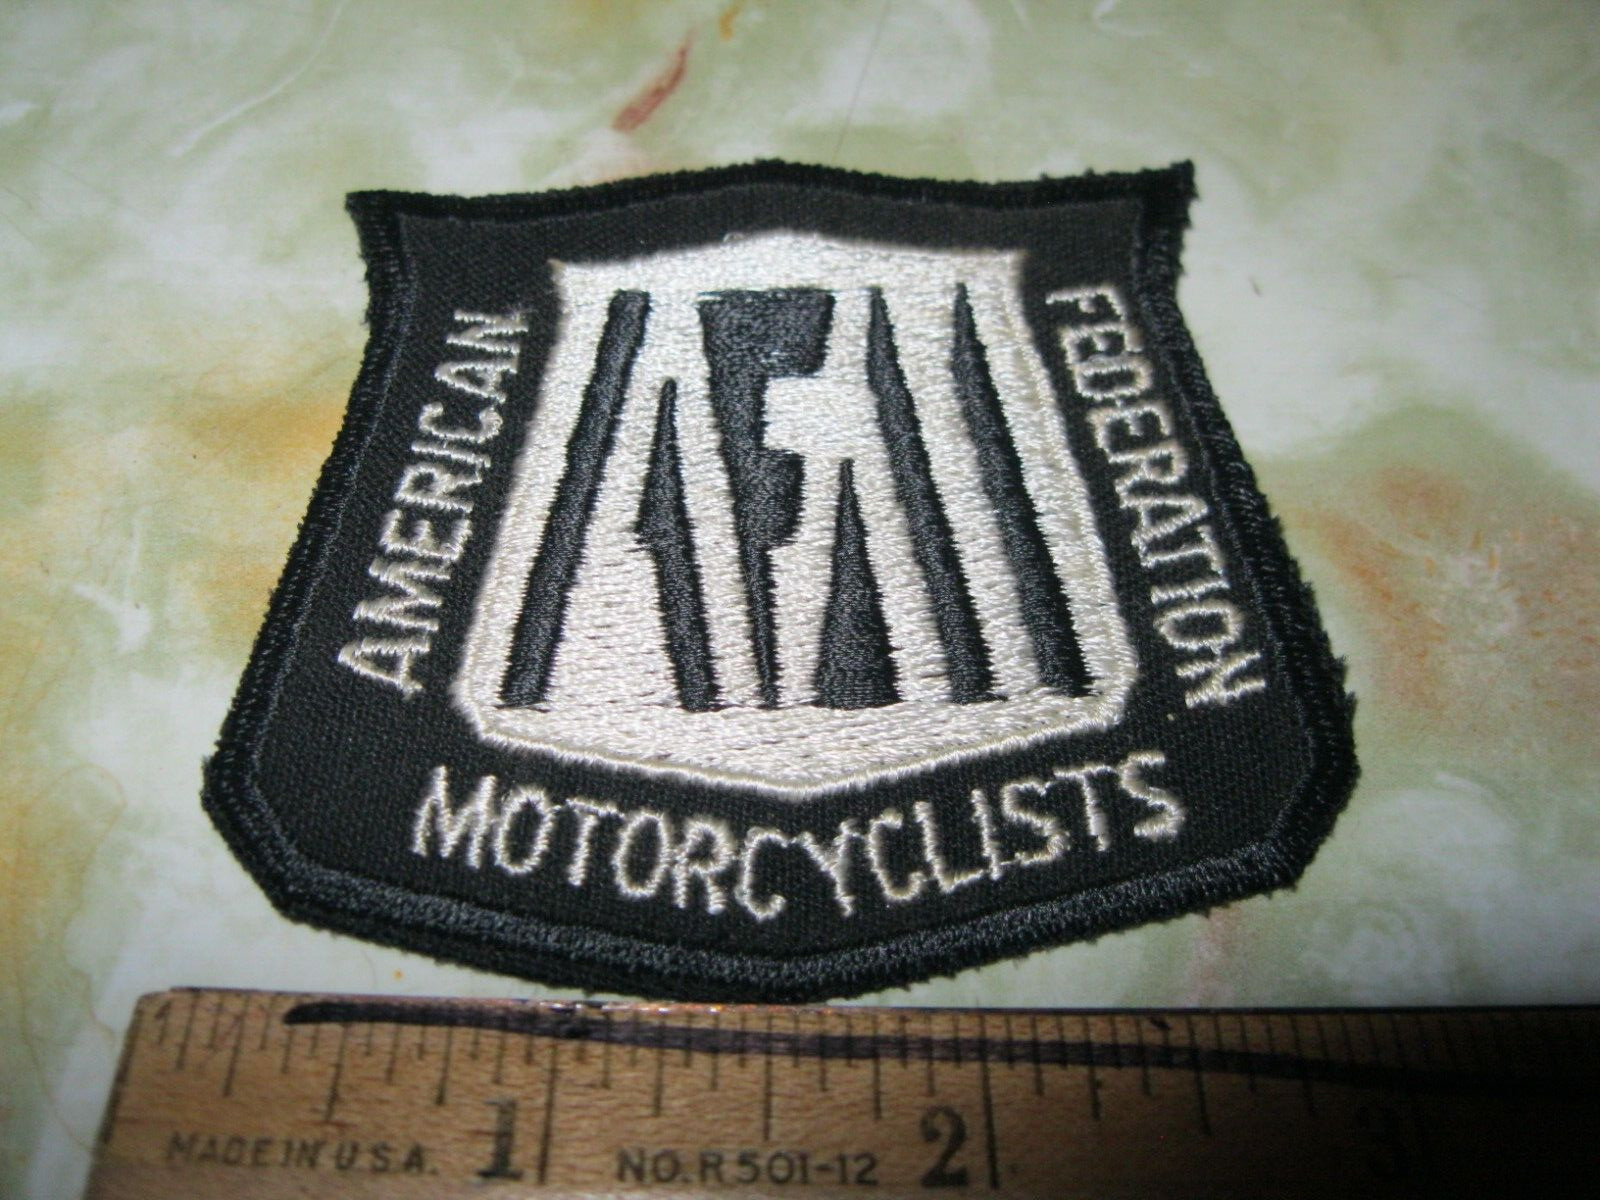 AMERICAN FEDERATION OF MOTORCYCLISTS VINTAGE MOTORCYCLE NEW PATCH